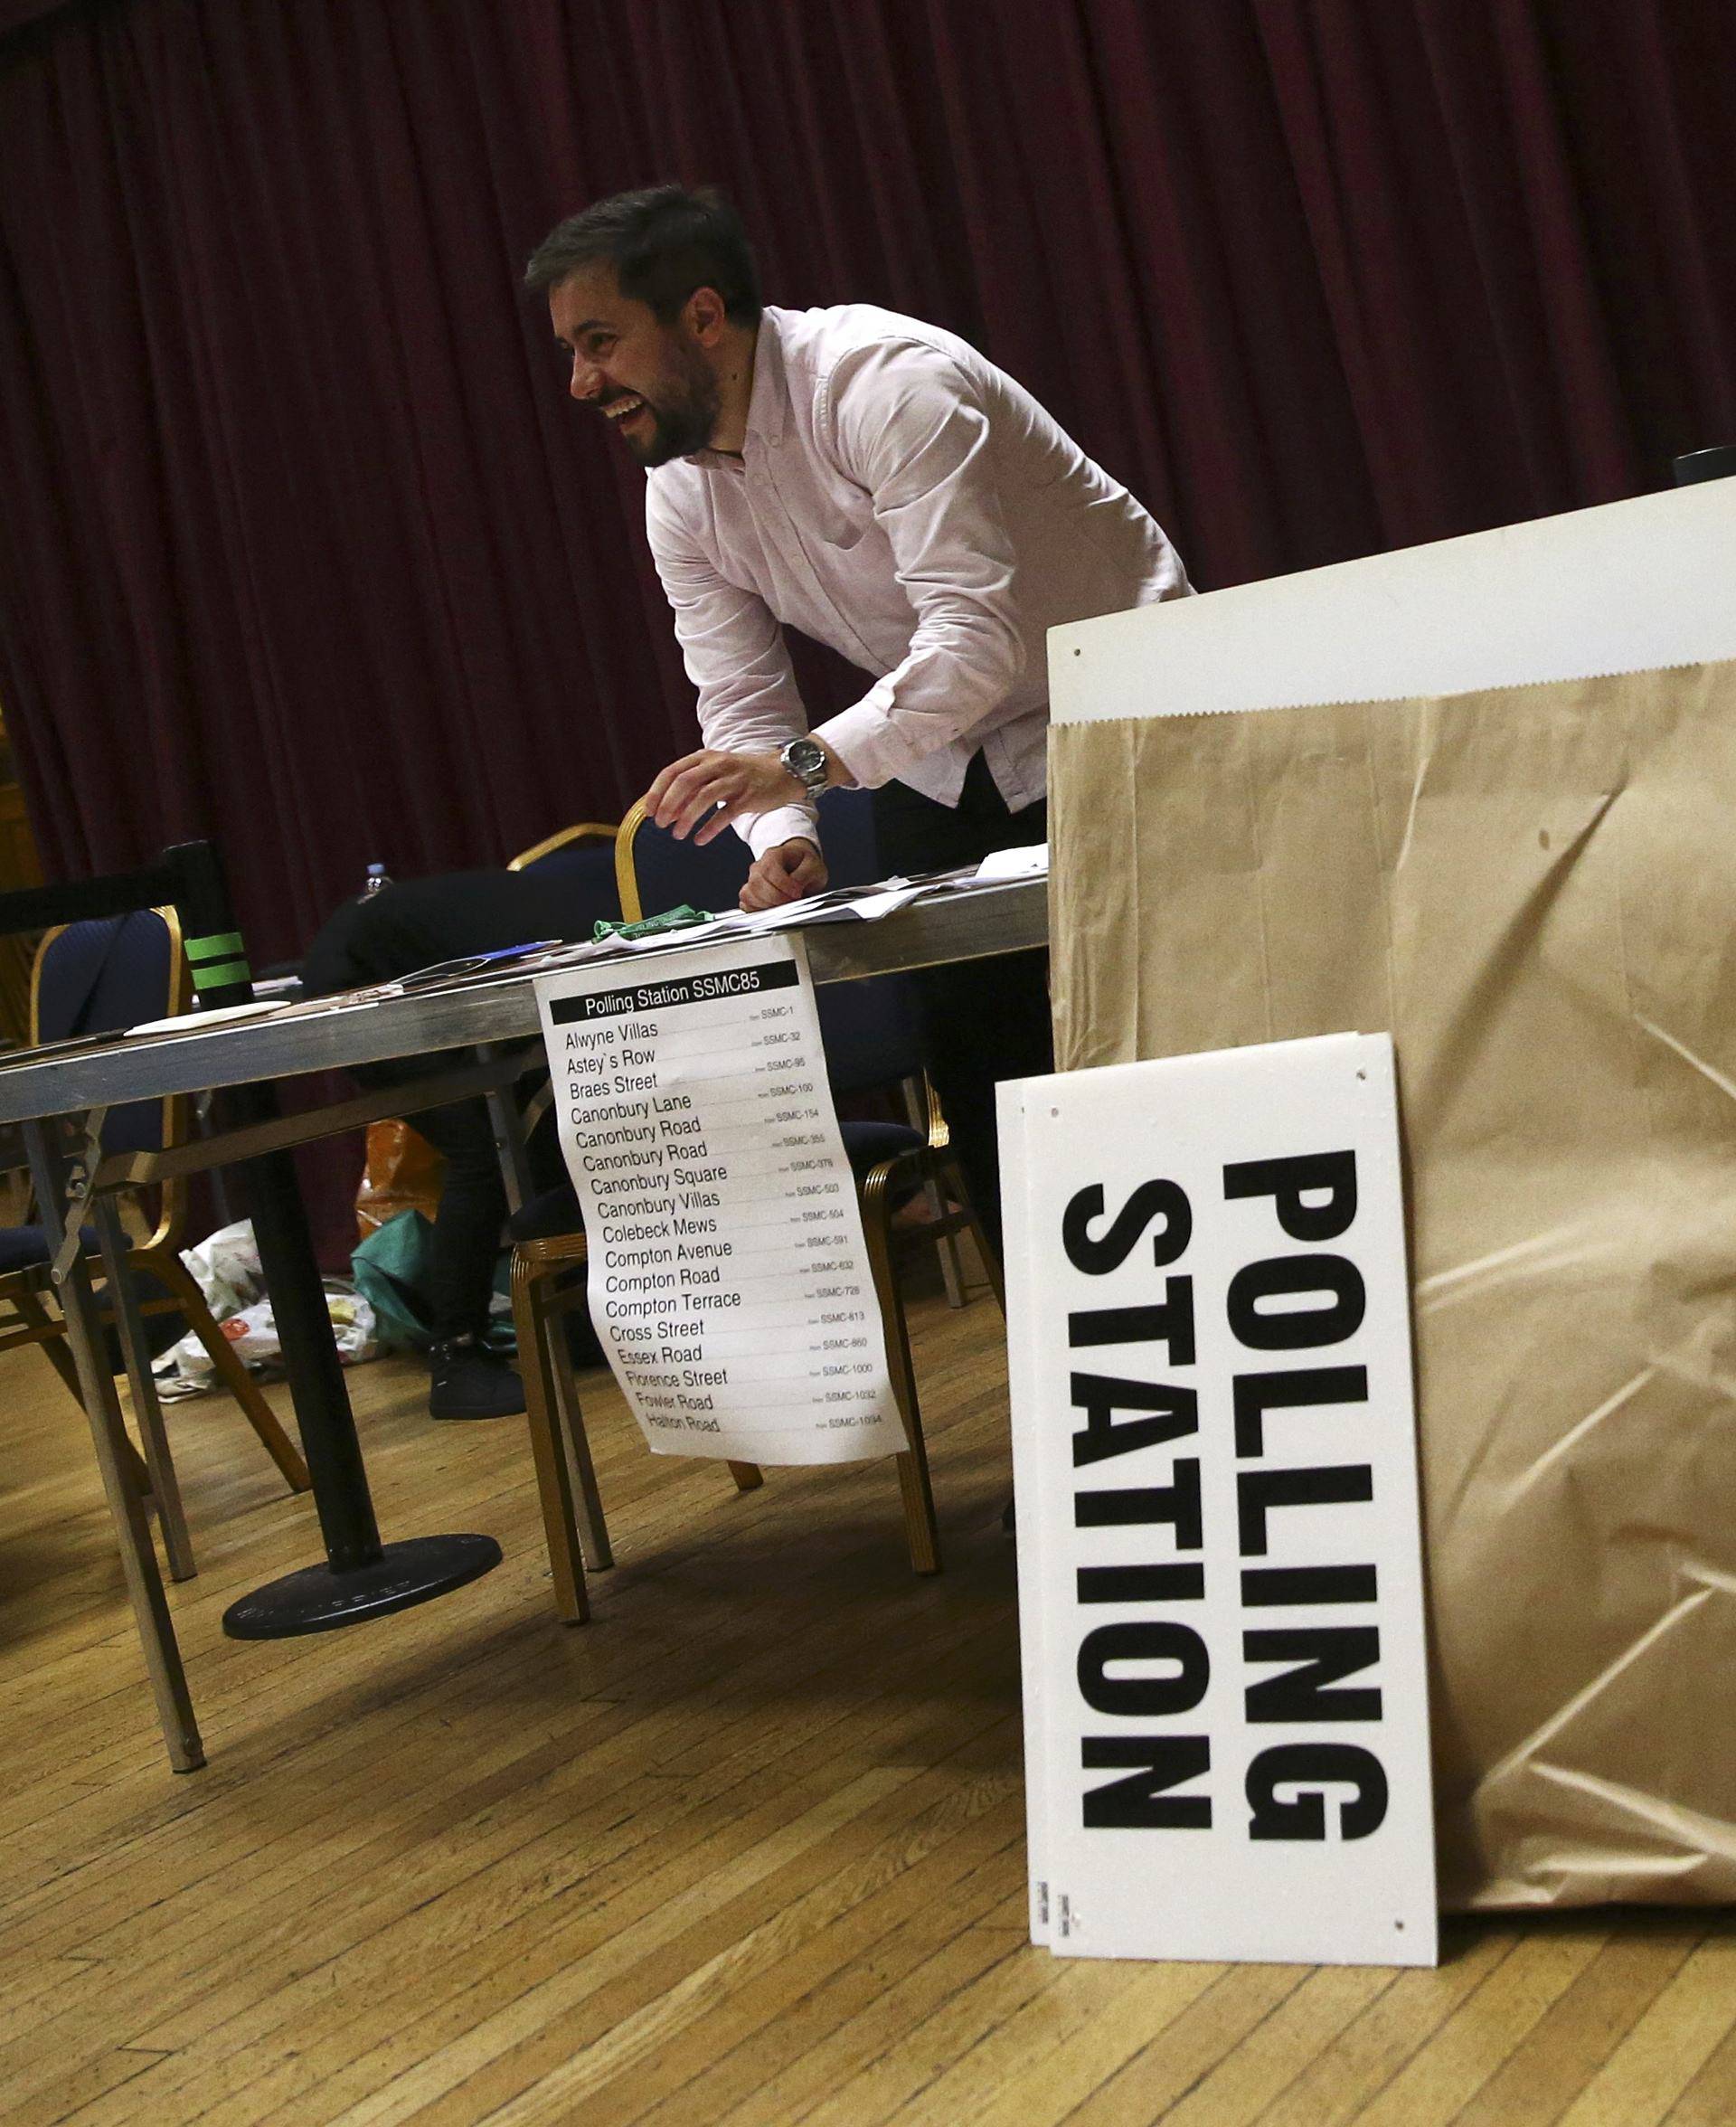 An electoral worker prepares up a polling station for the Referendum on the European Union in north London